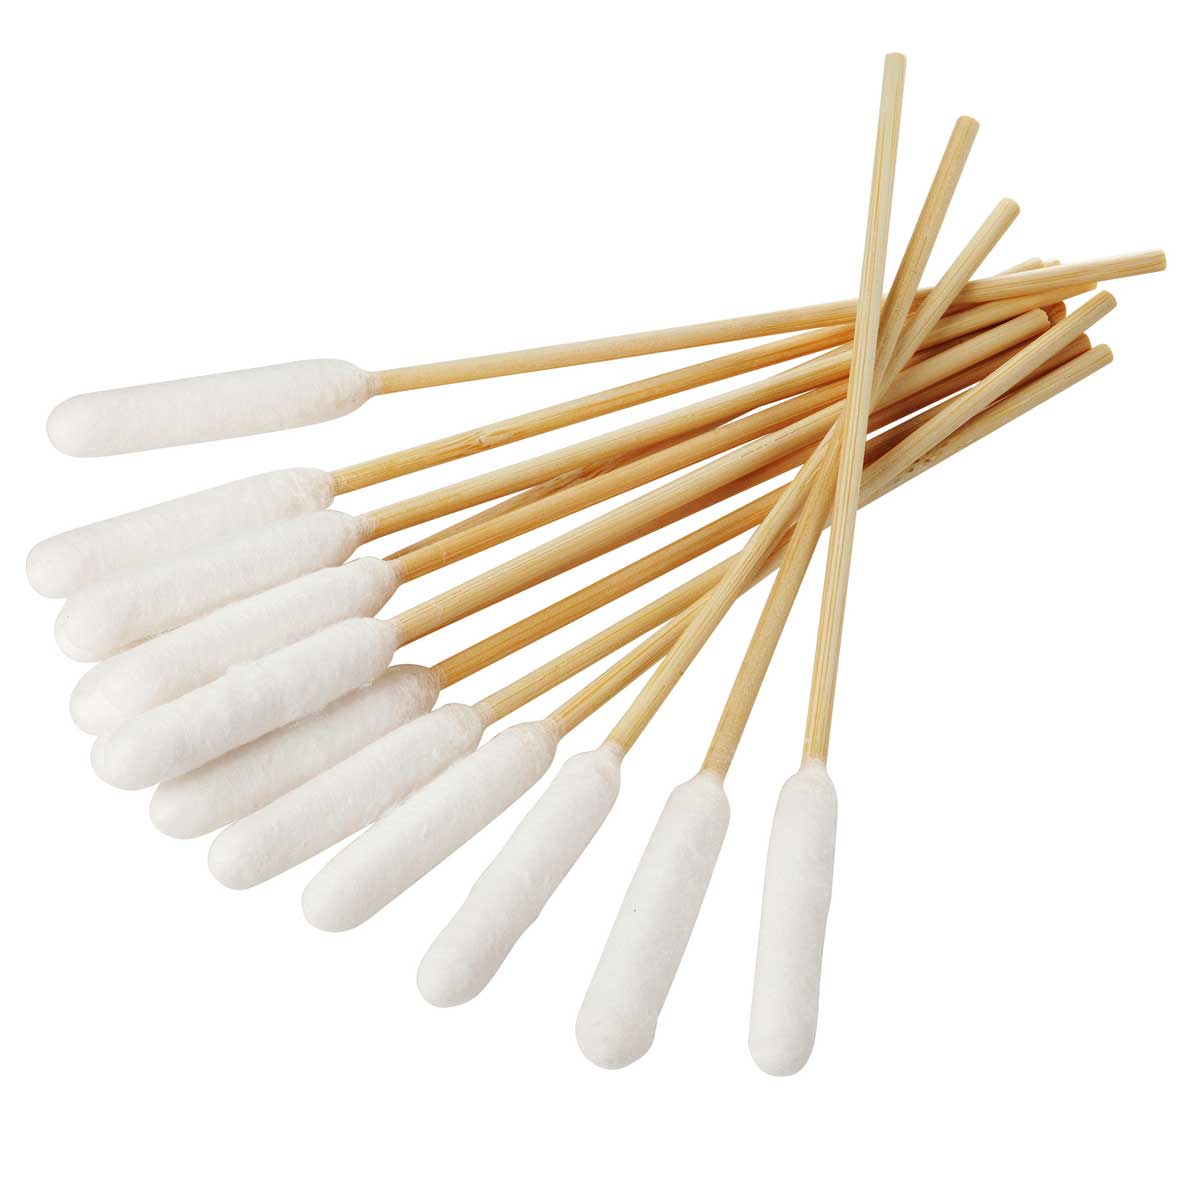 Cotons-tiges chiens Bamboo Stick s/m 30 pces